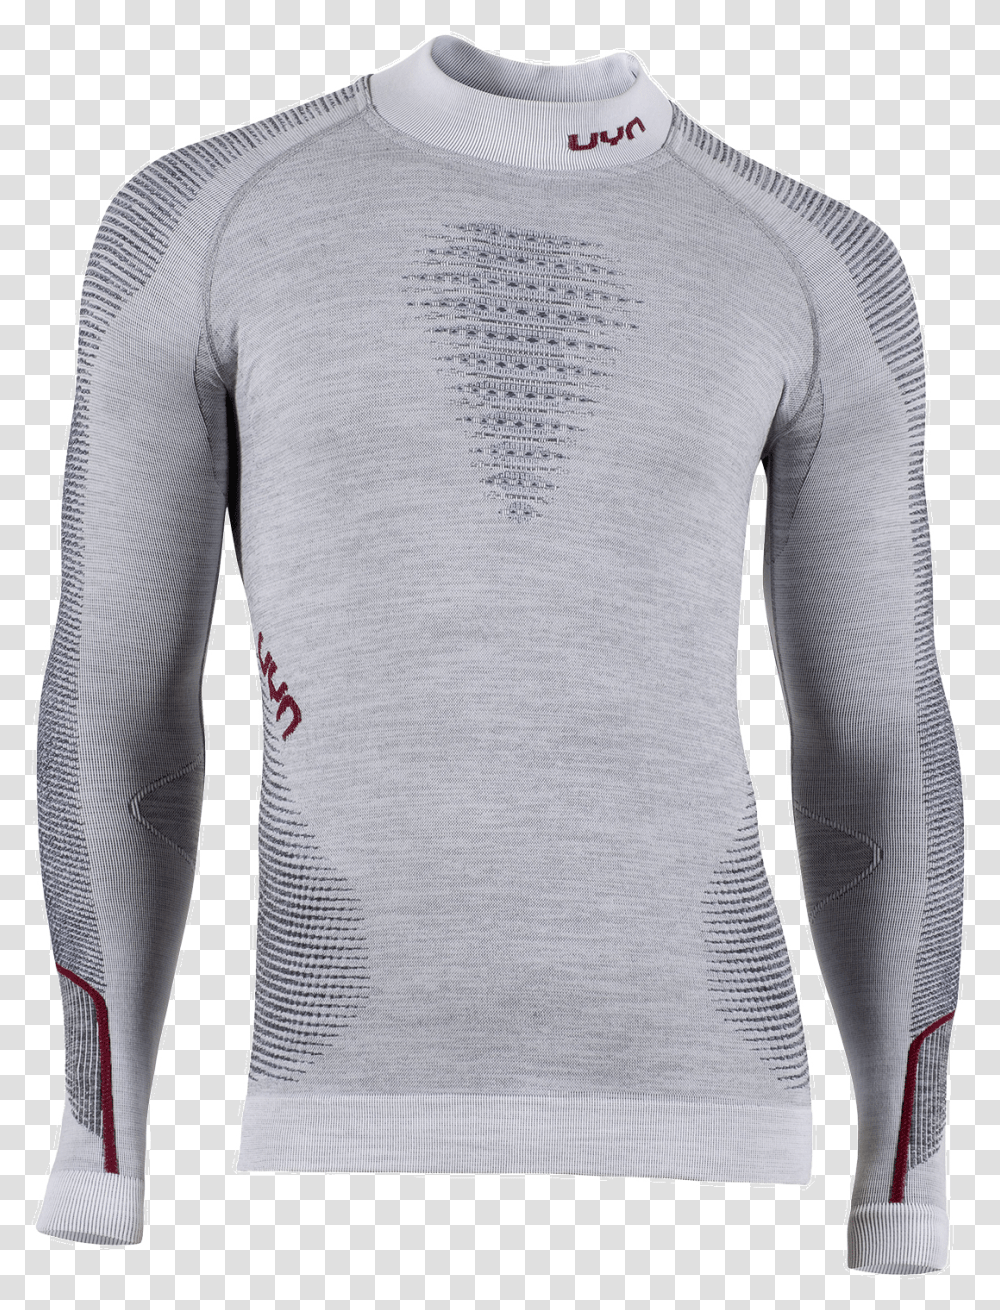 Tshirt Homme Manches Longues Et Col Chemine, Armor, Sleeve, Apparel Transparent Png